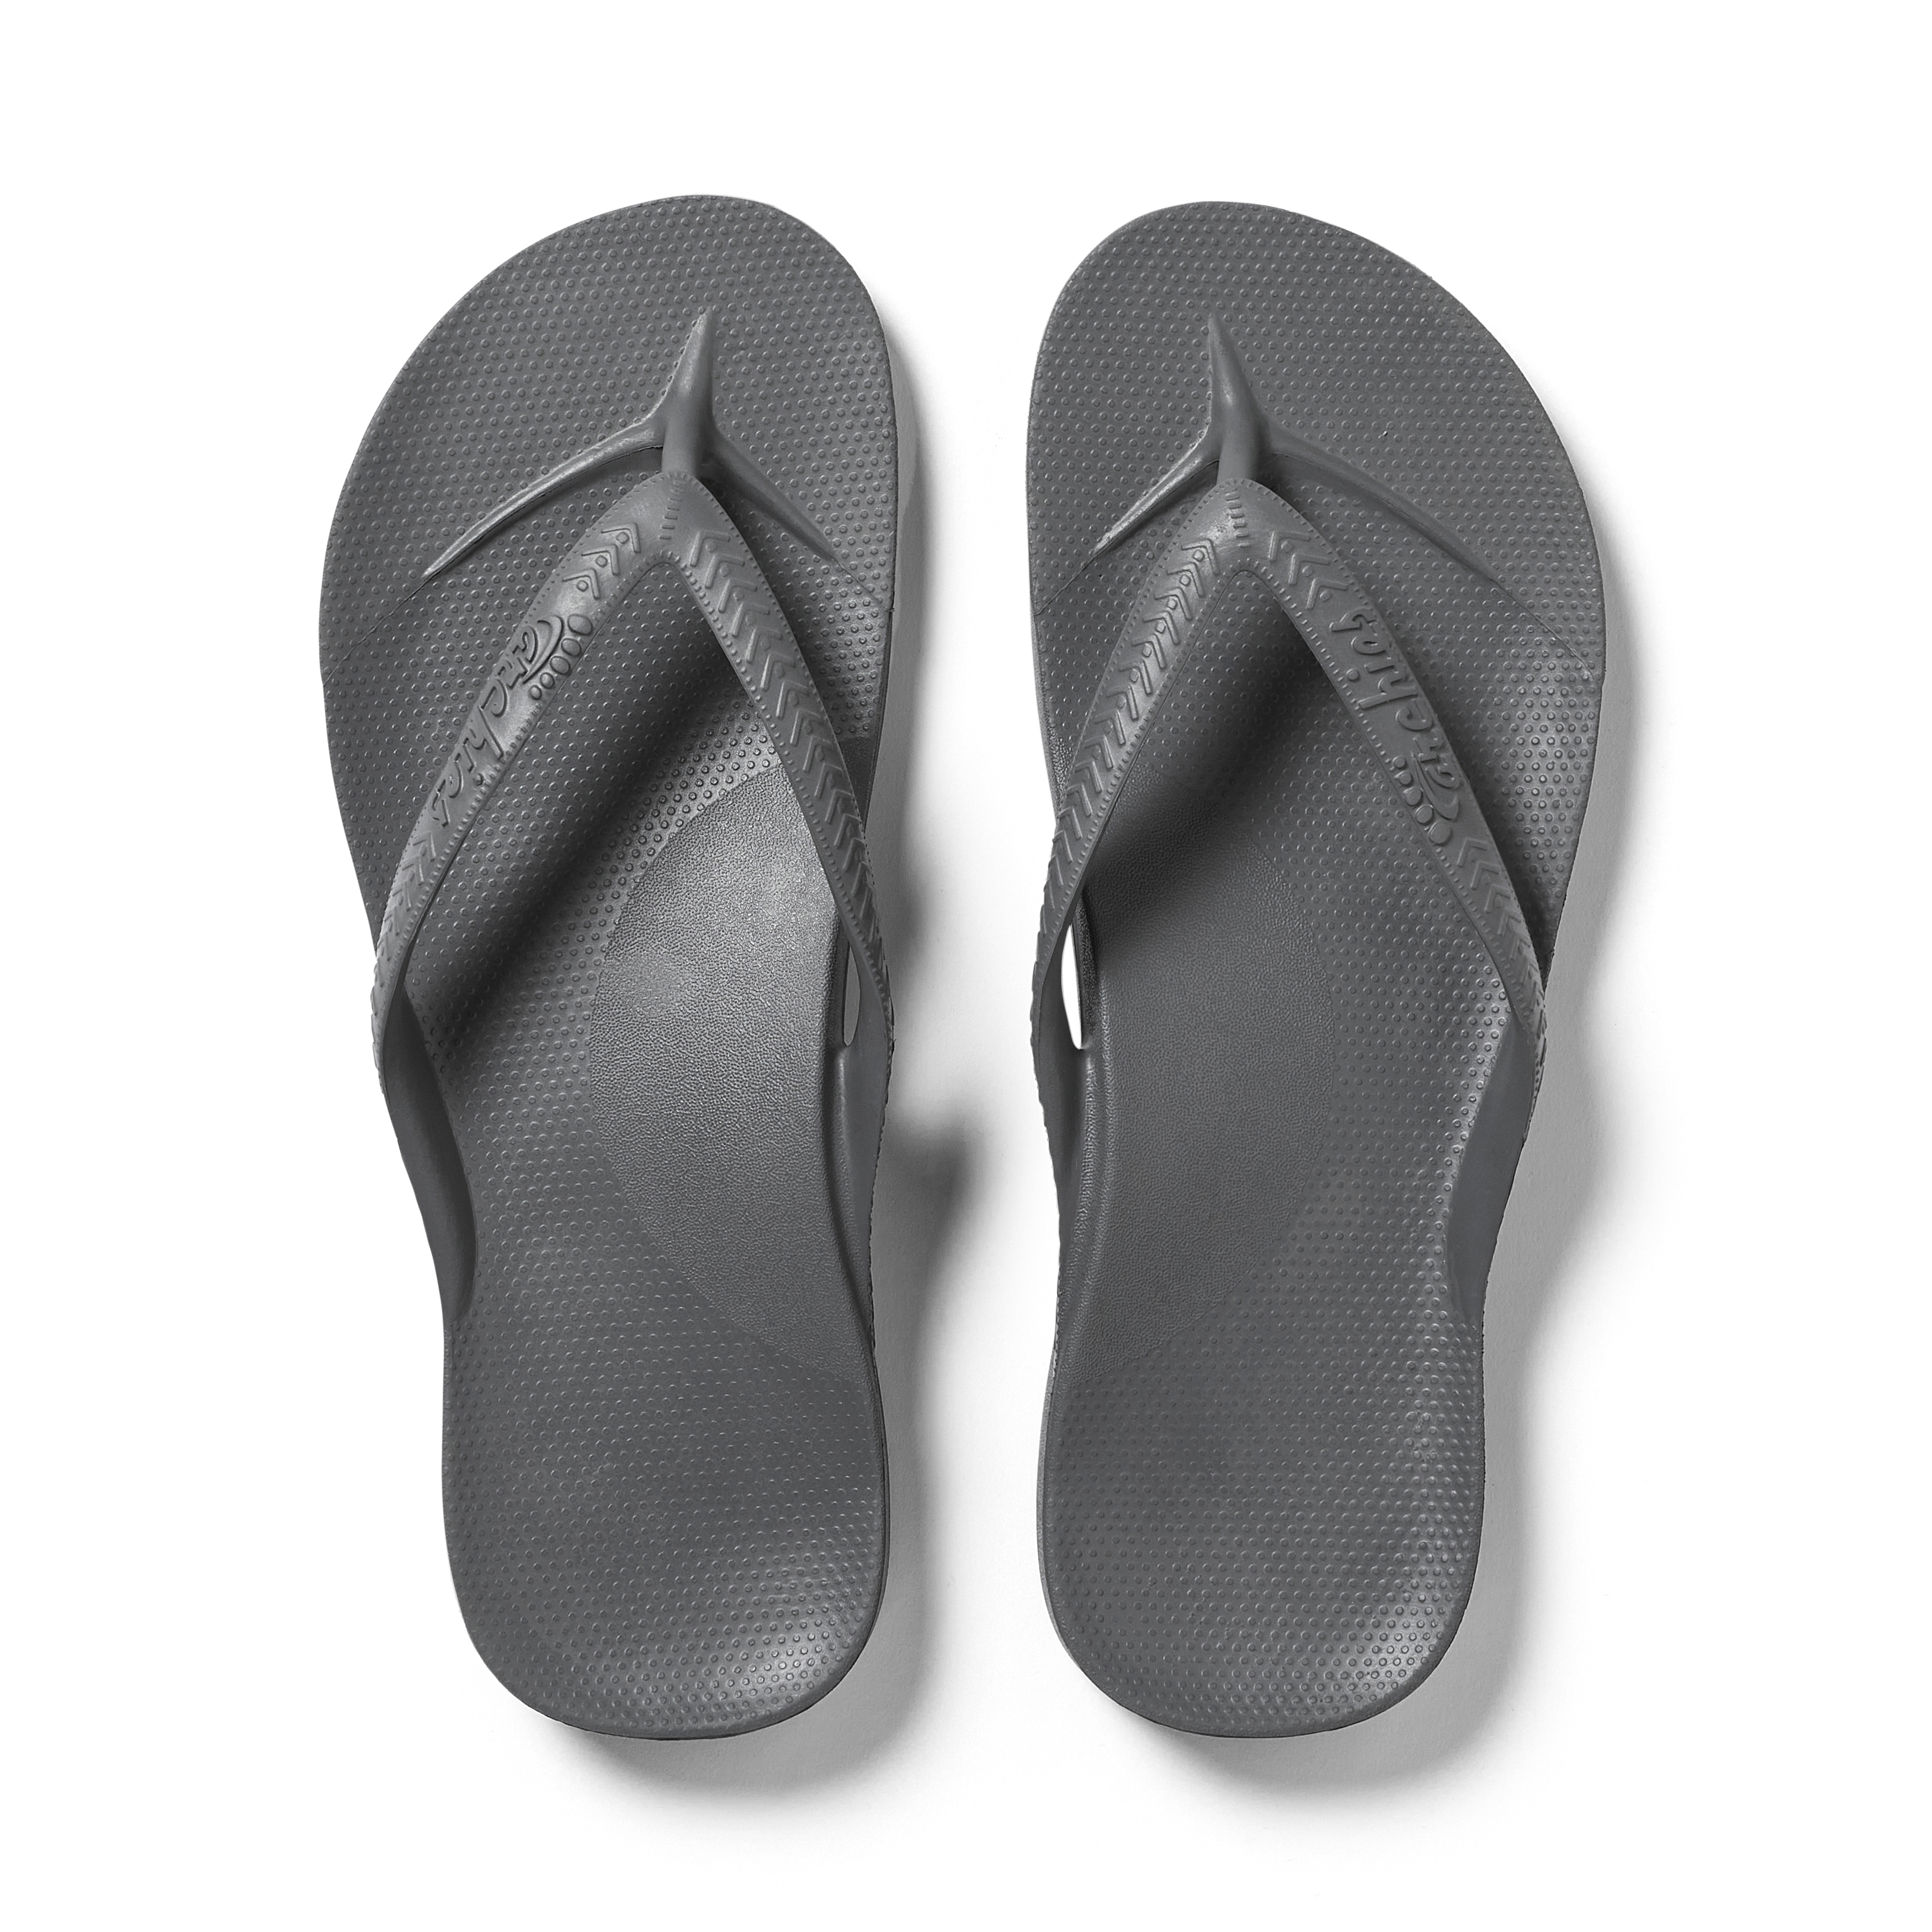 Archies Flip Flop Personalize your Archies Flip Flops U PICK ONE Arch  Support